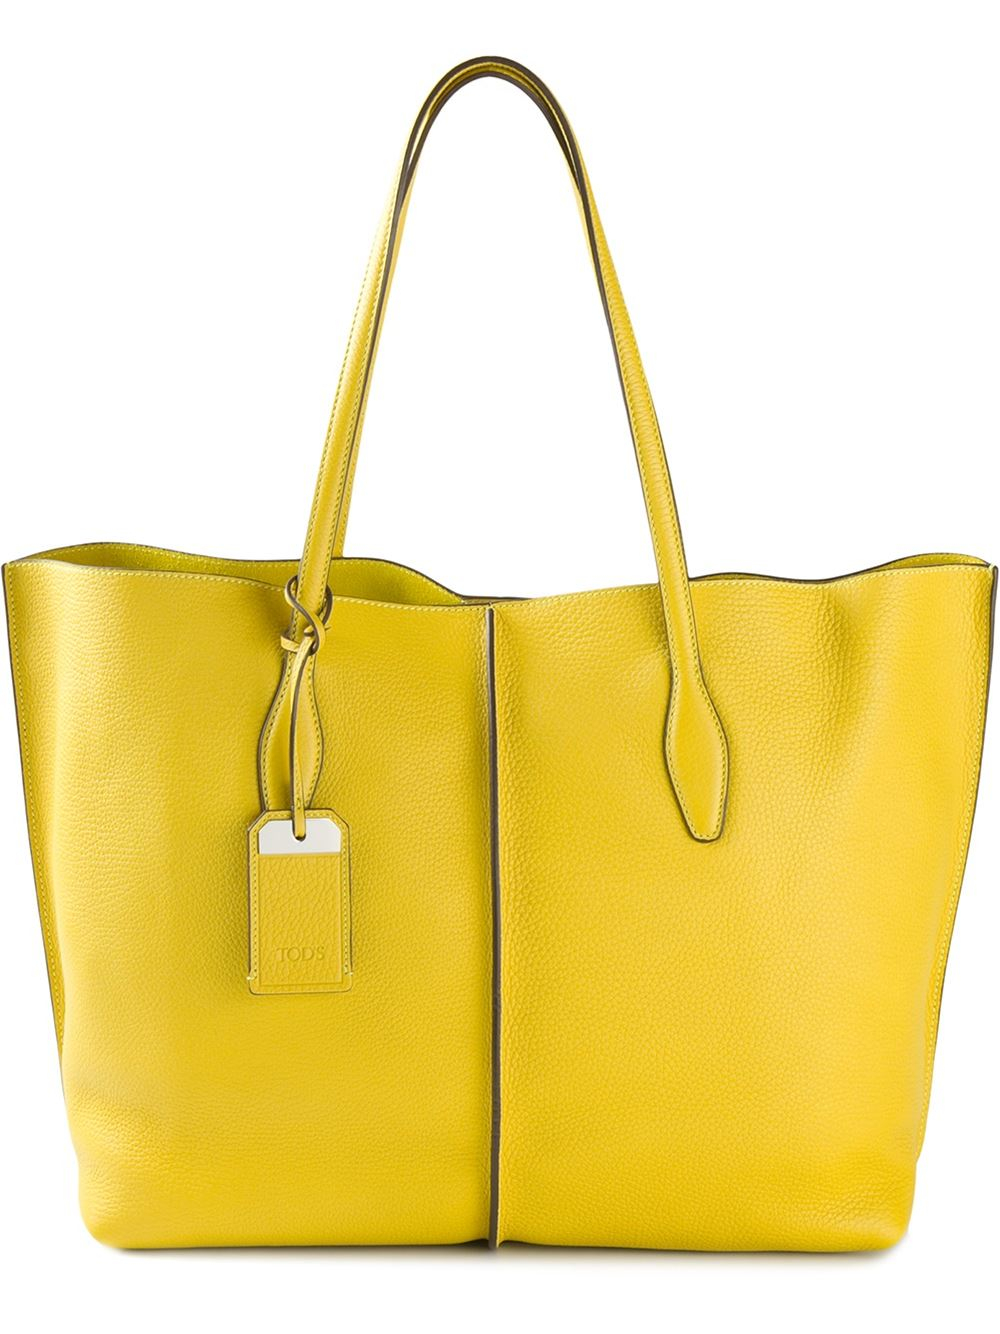 Yellow Tote Bags For Women | IUCN Water